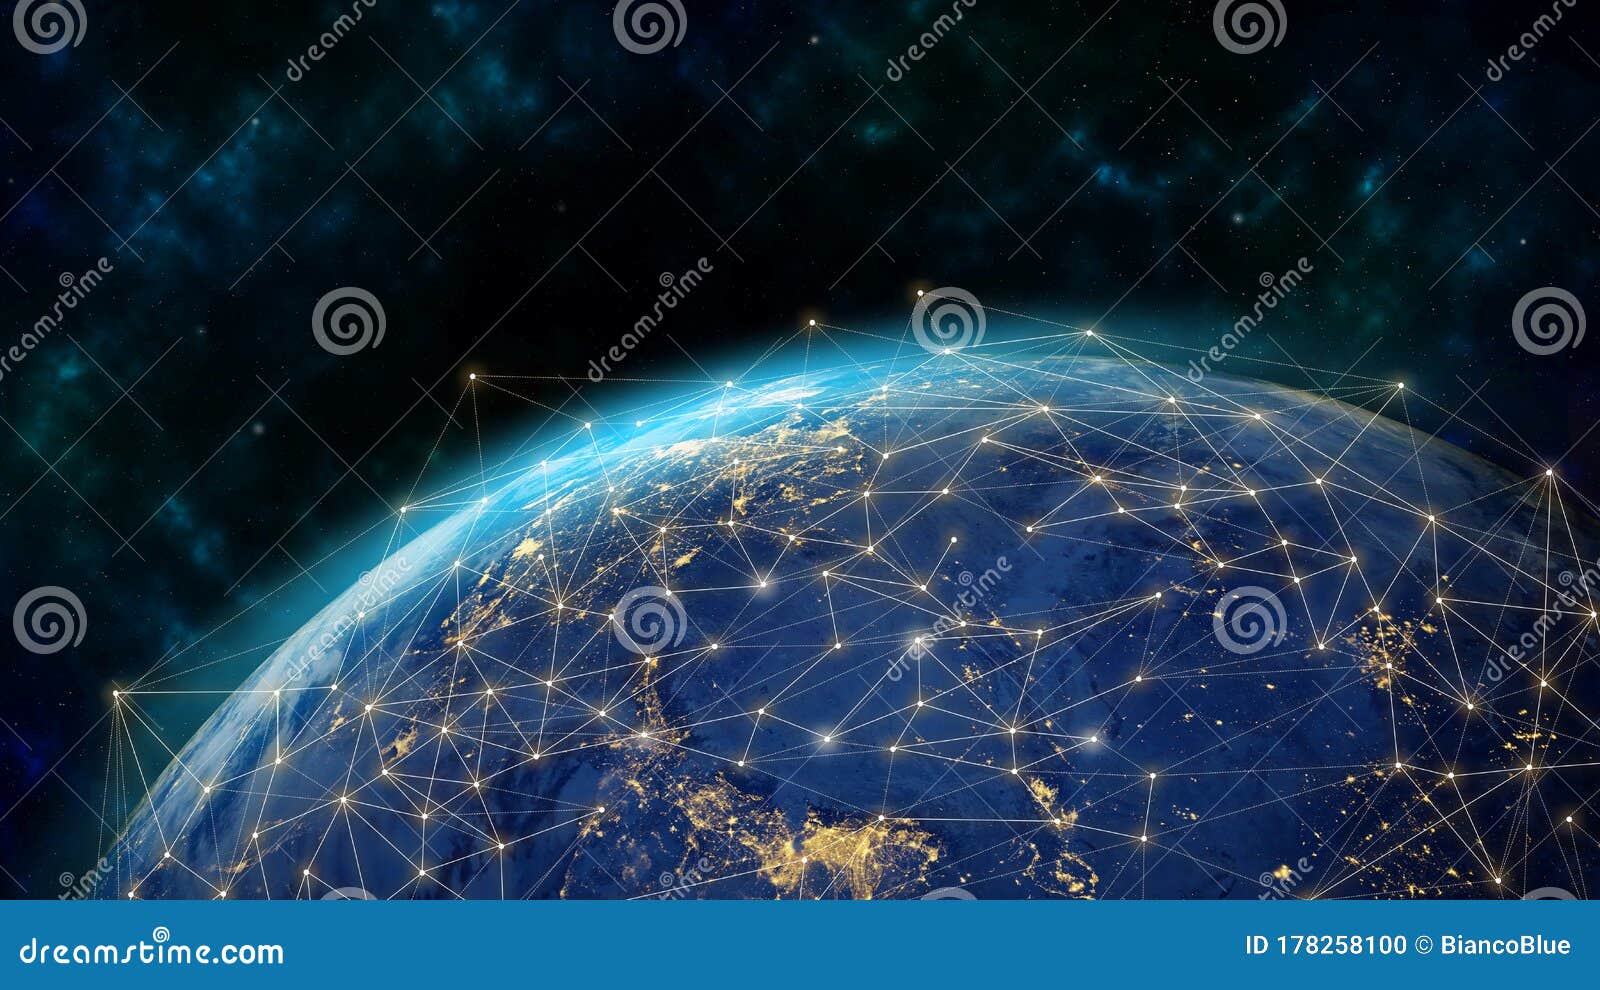 global network modern creative telecommunication and internet connection